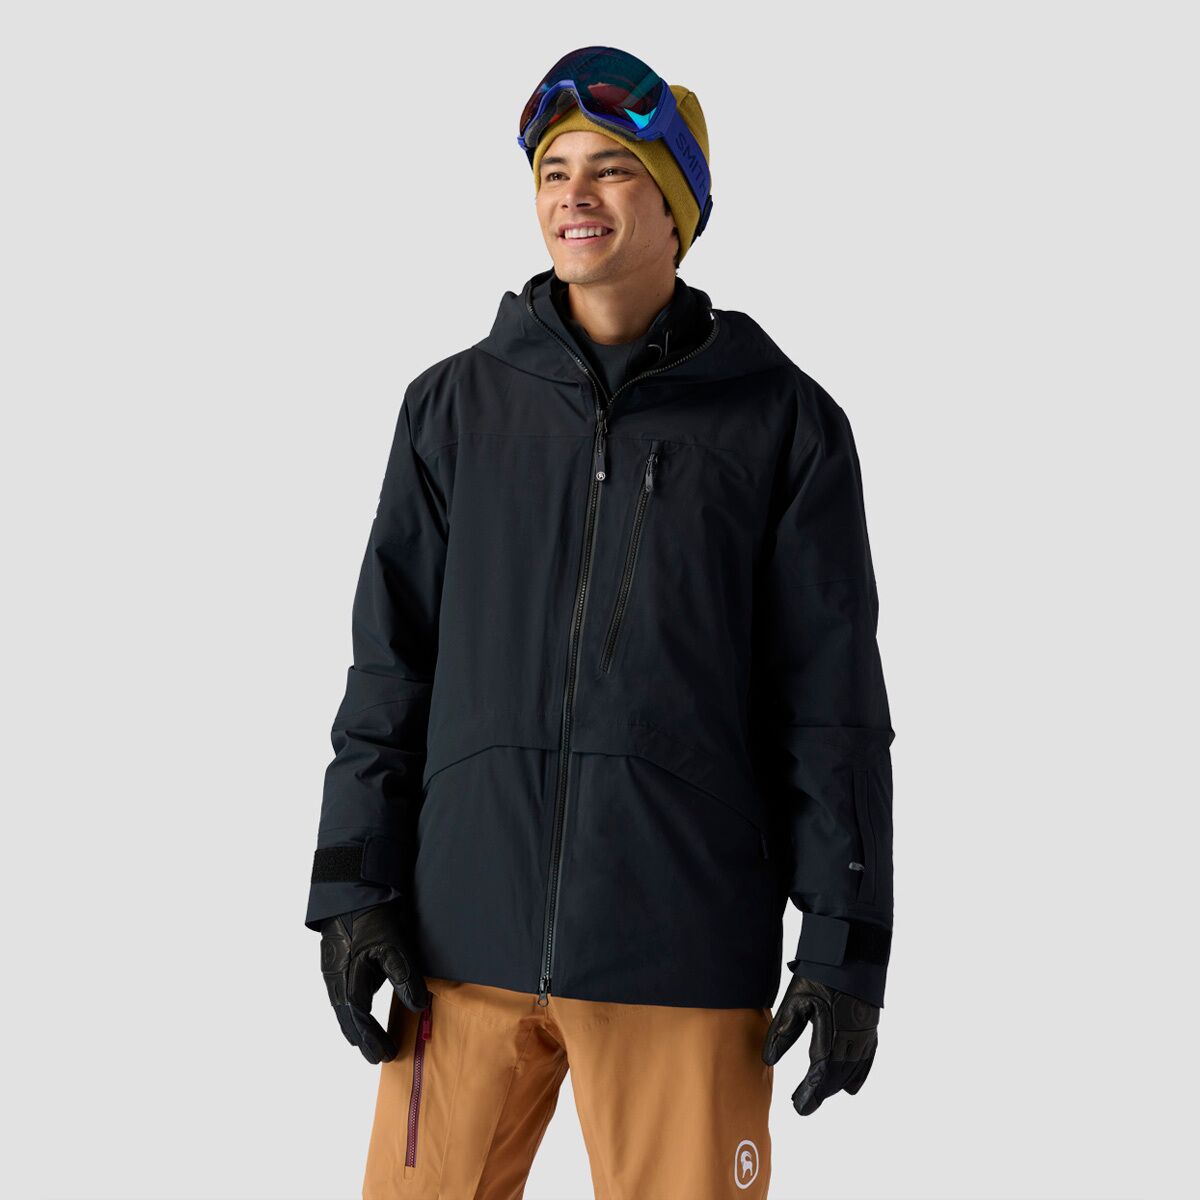 Backcountry Last Chair Stretch Insulated Jacket - Men's Black